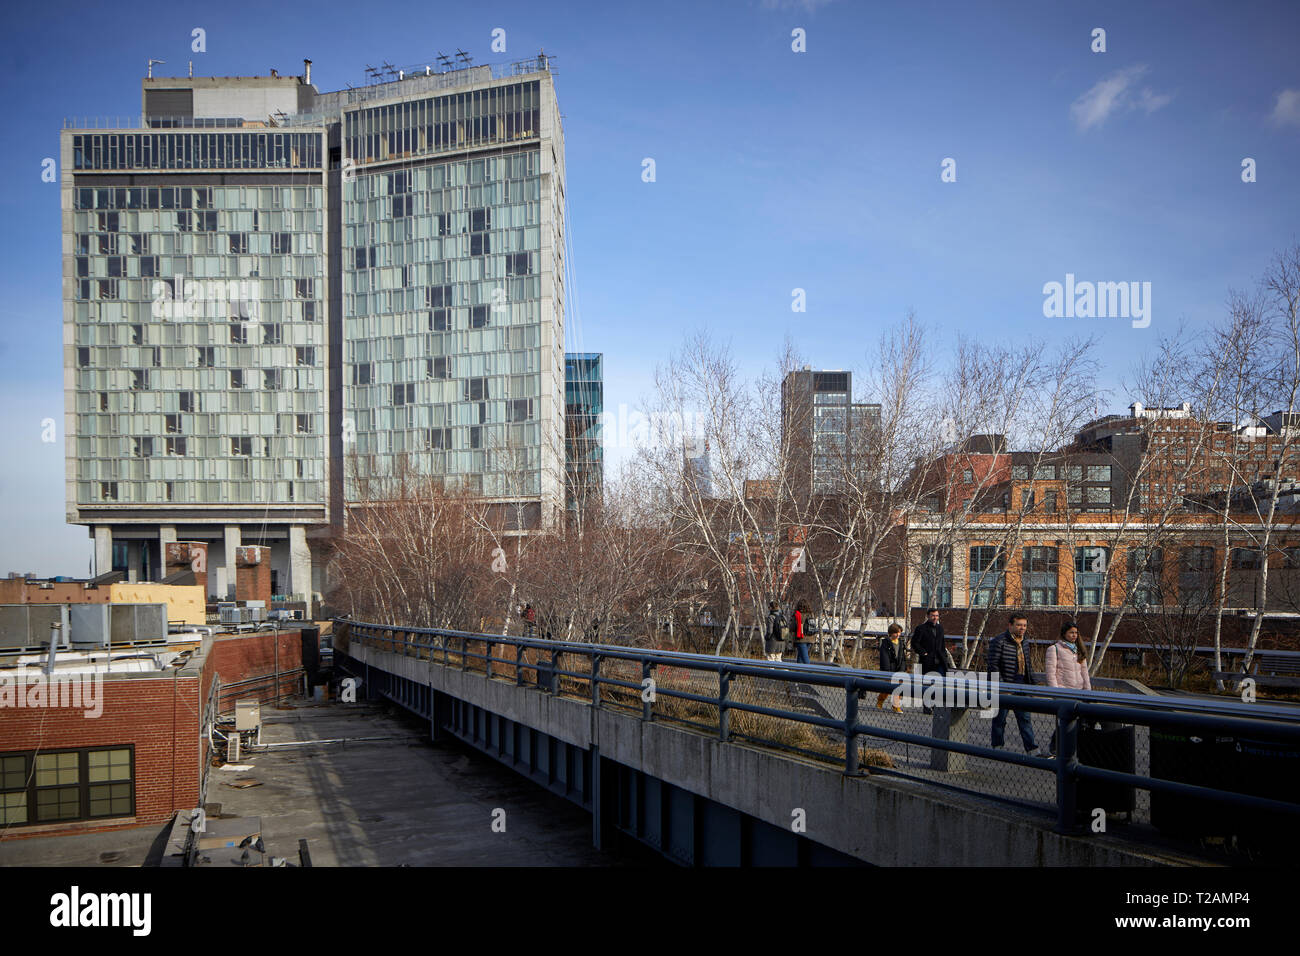 The High Line elevated linear park, greenway former rail trail created on a former New York Central Railroad in Manhattan and The Standard, High Line  Stock Photo